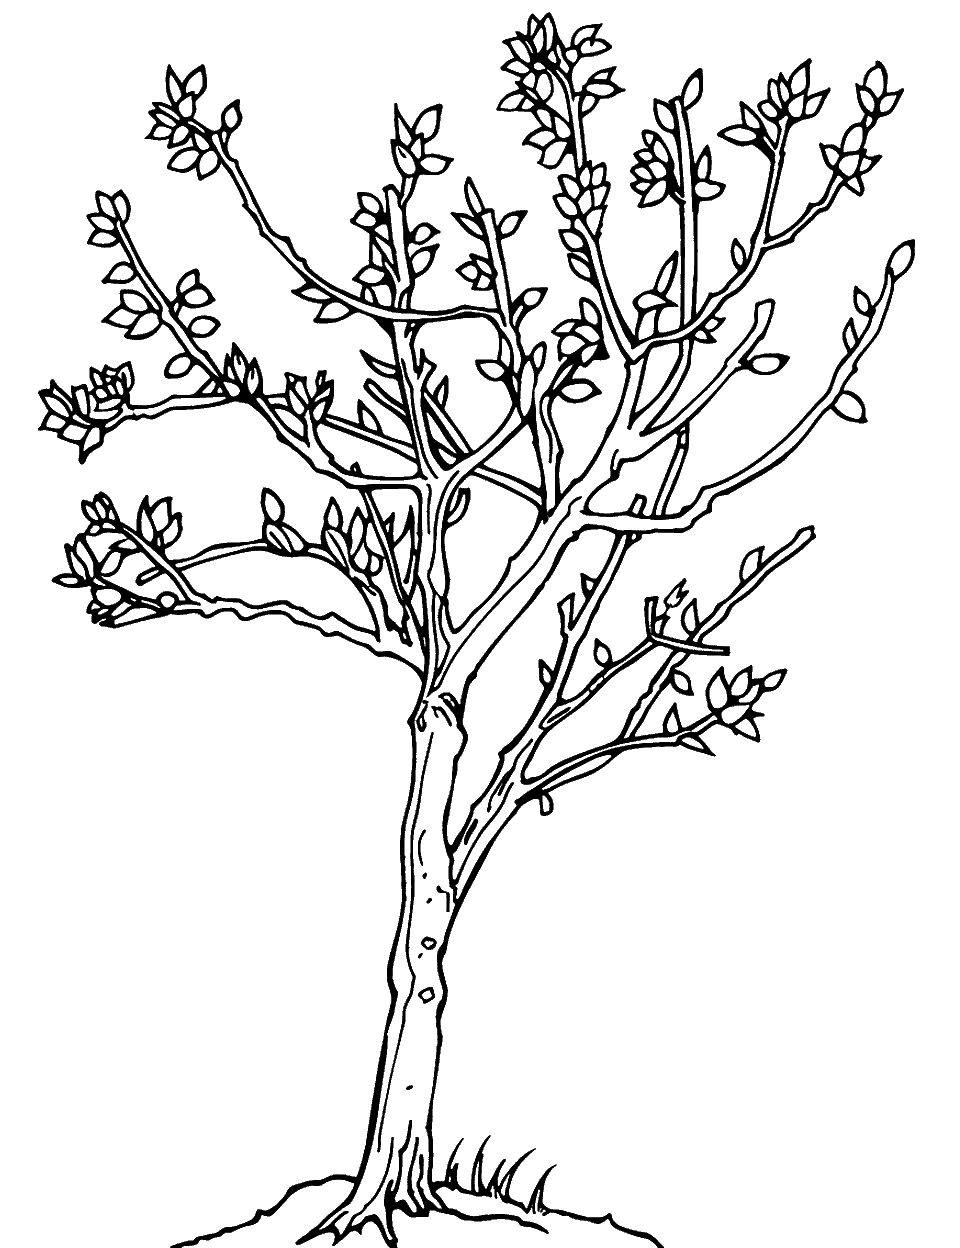 Spring Awakening Coloring Page - A tree in early bloom, with buds and the first leaves of spring appearing.